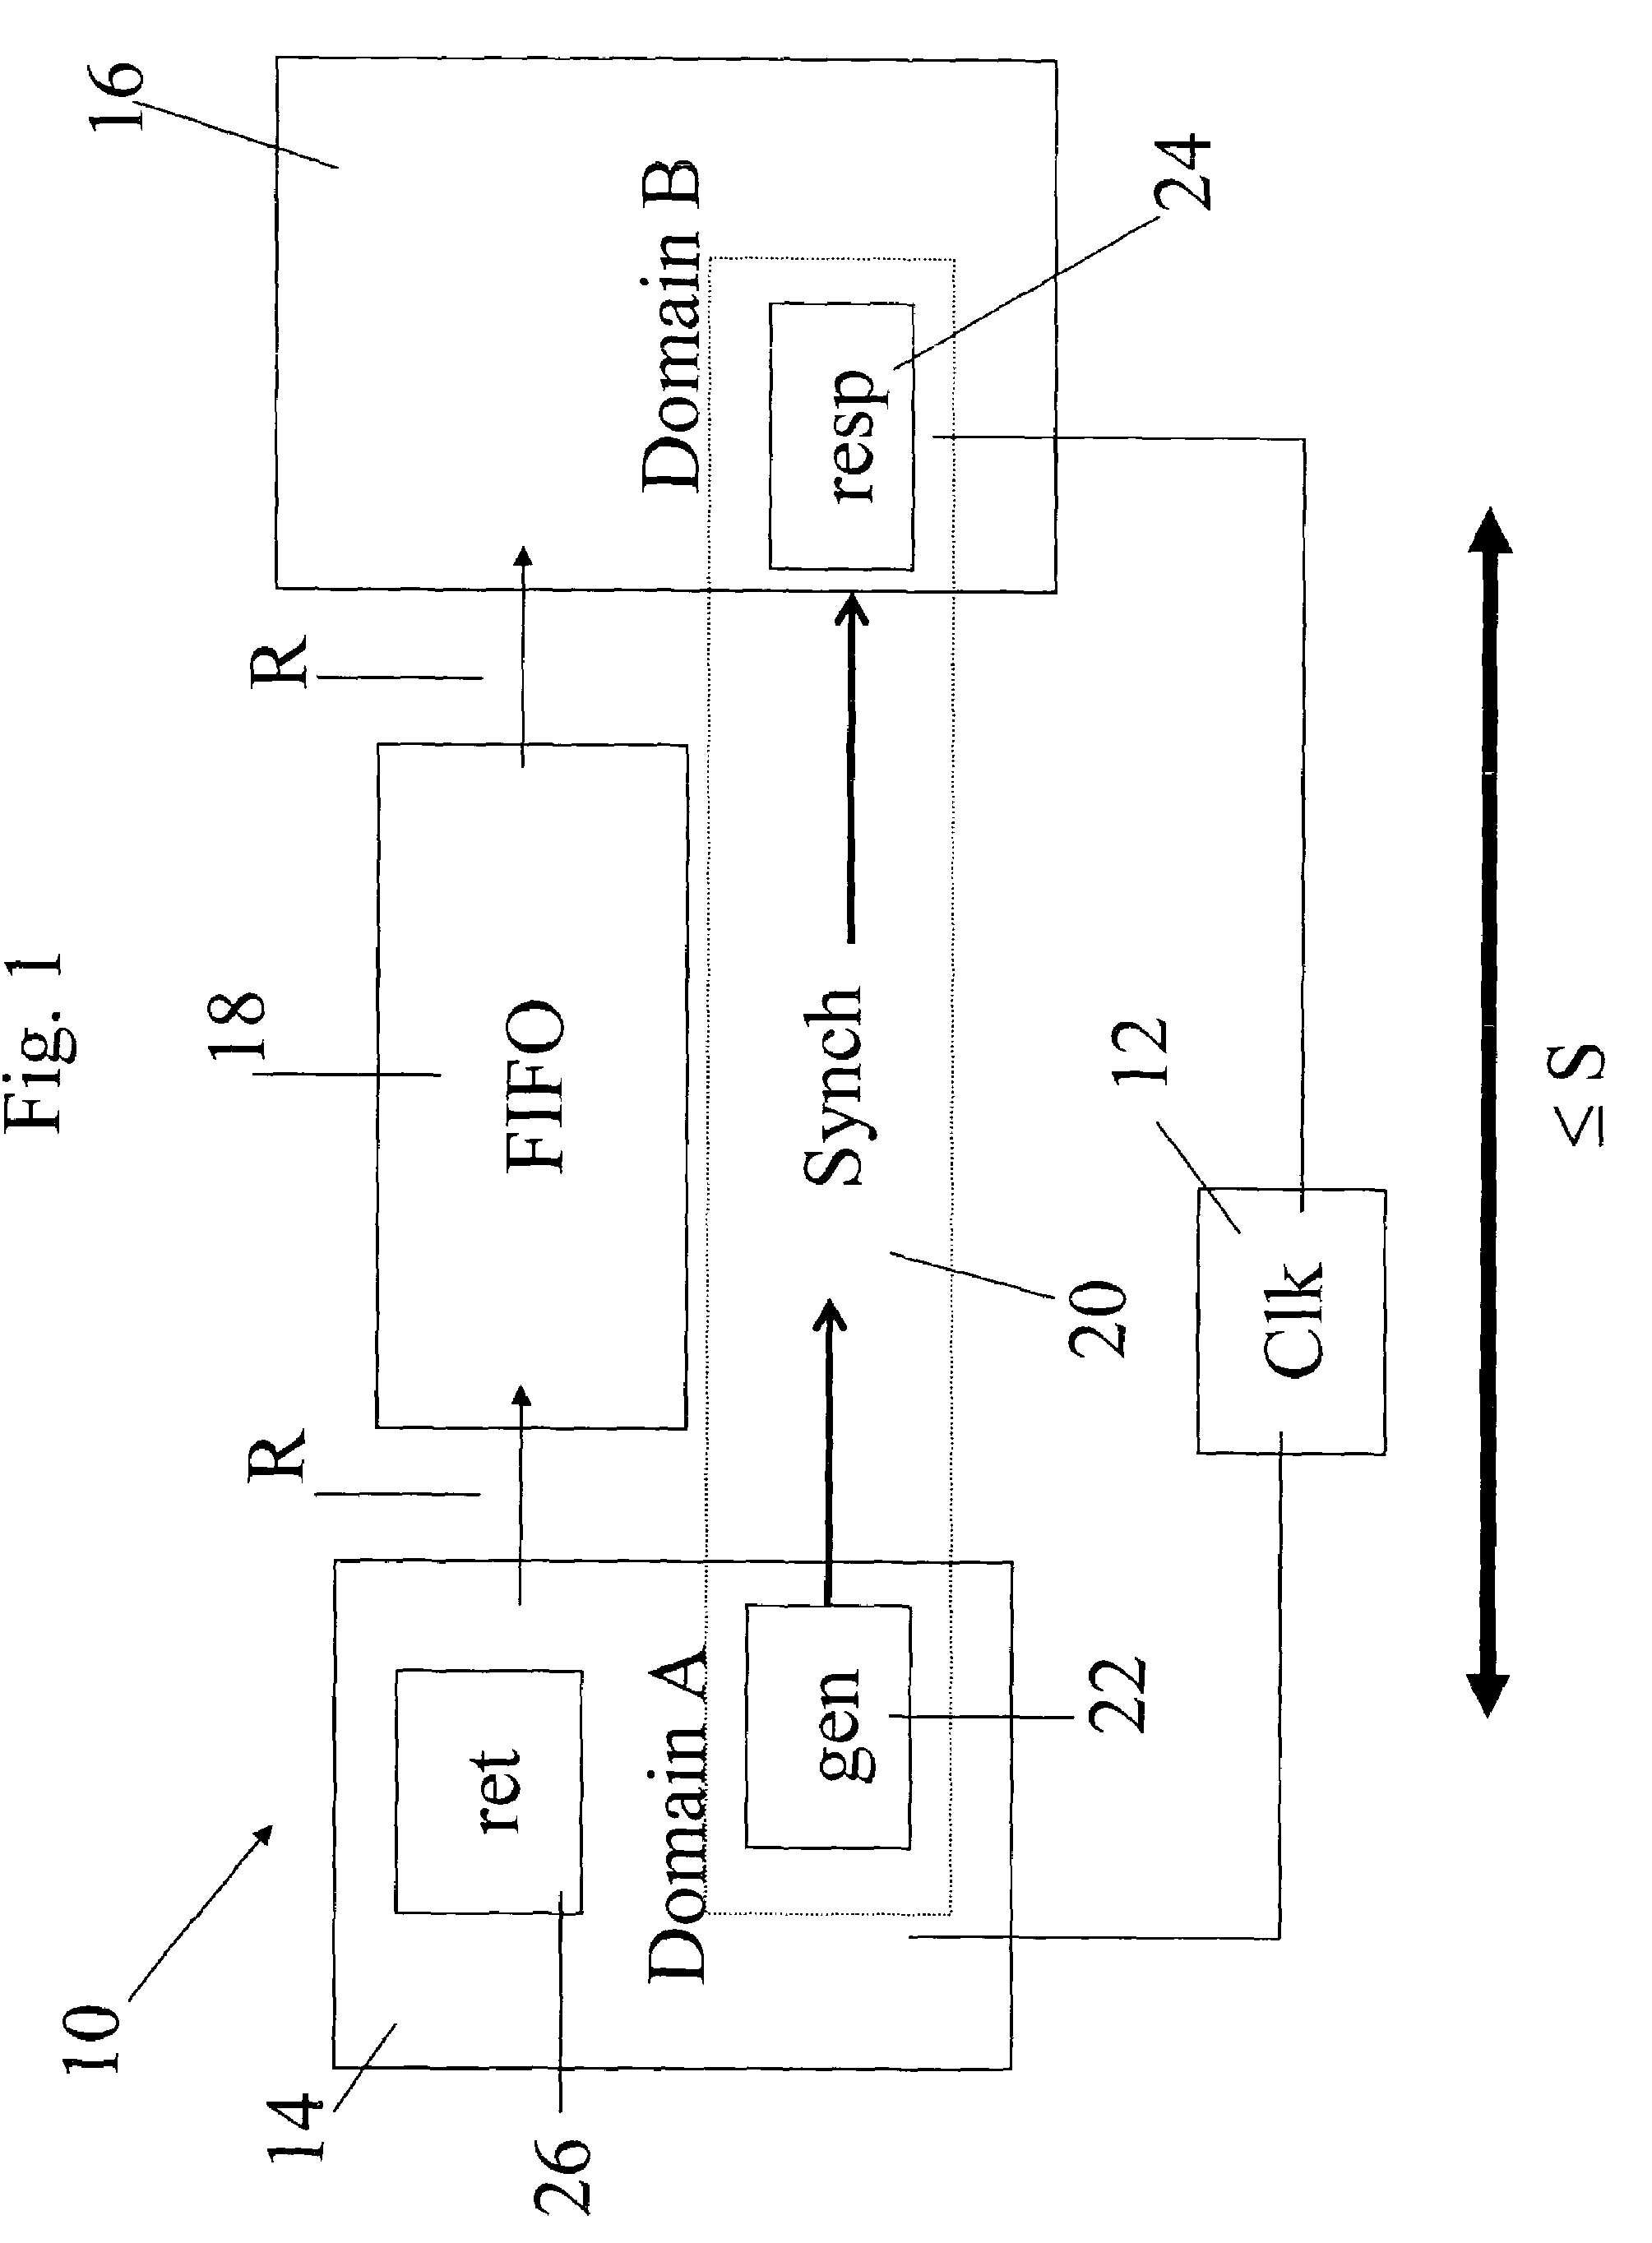 Data transfer between phase independent clock domains